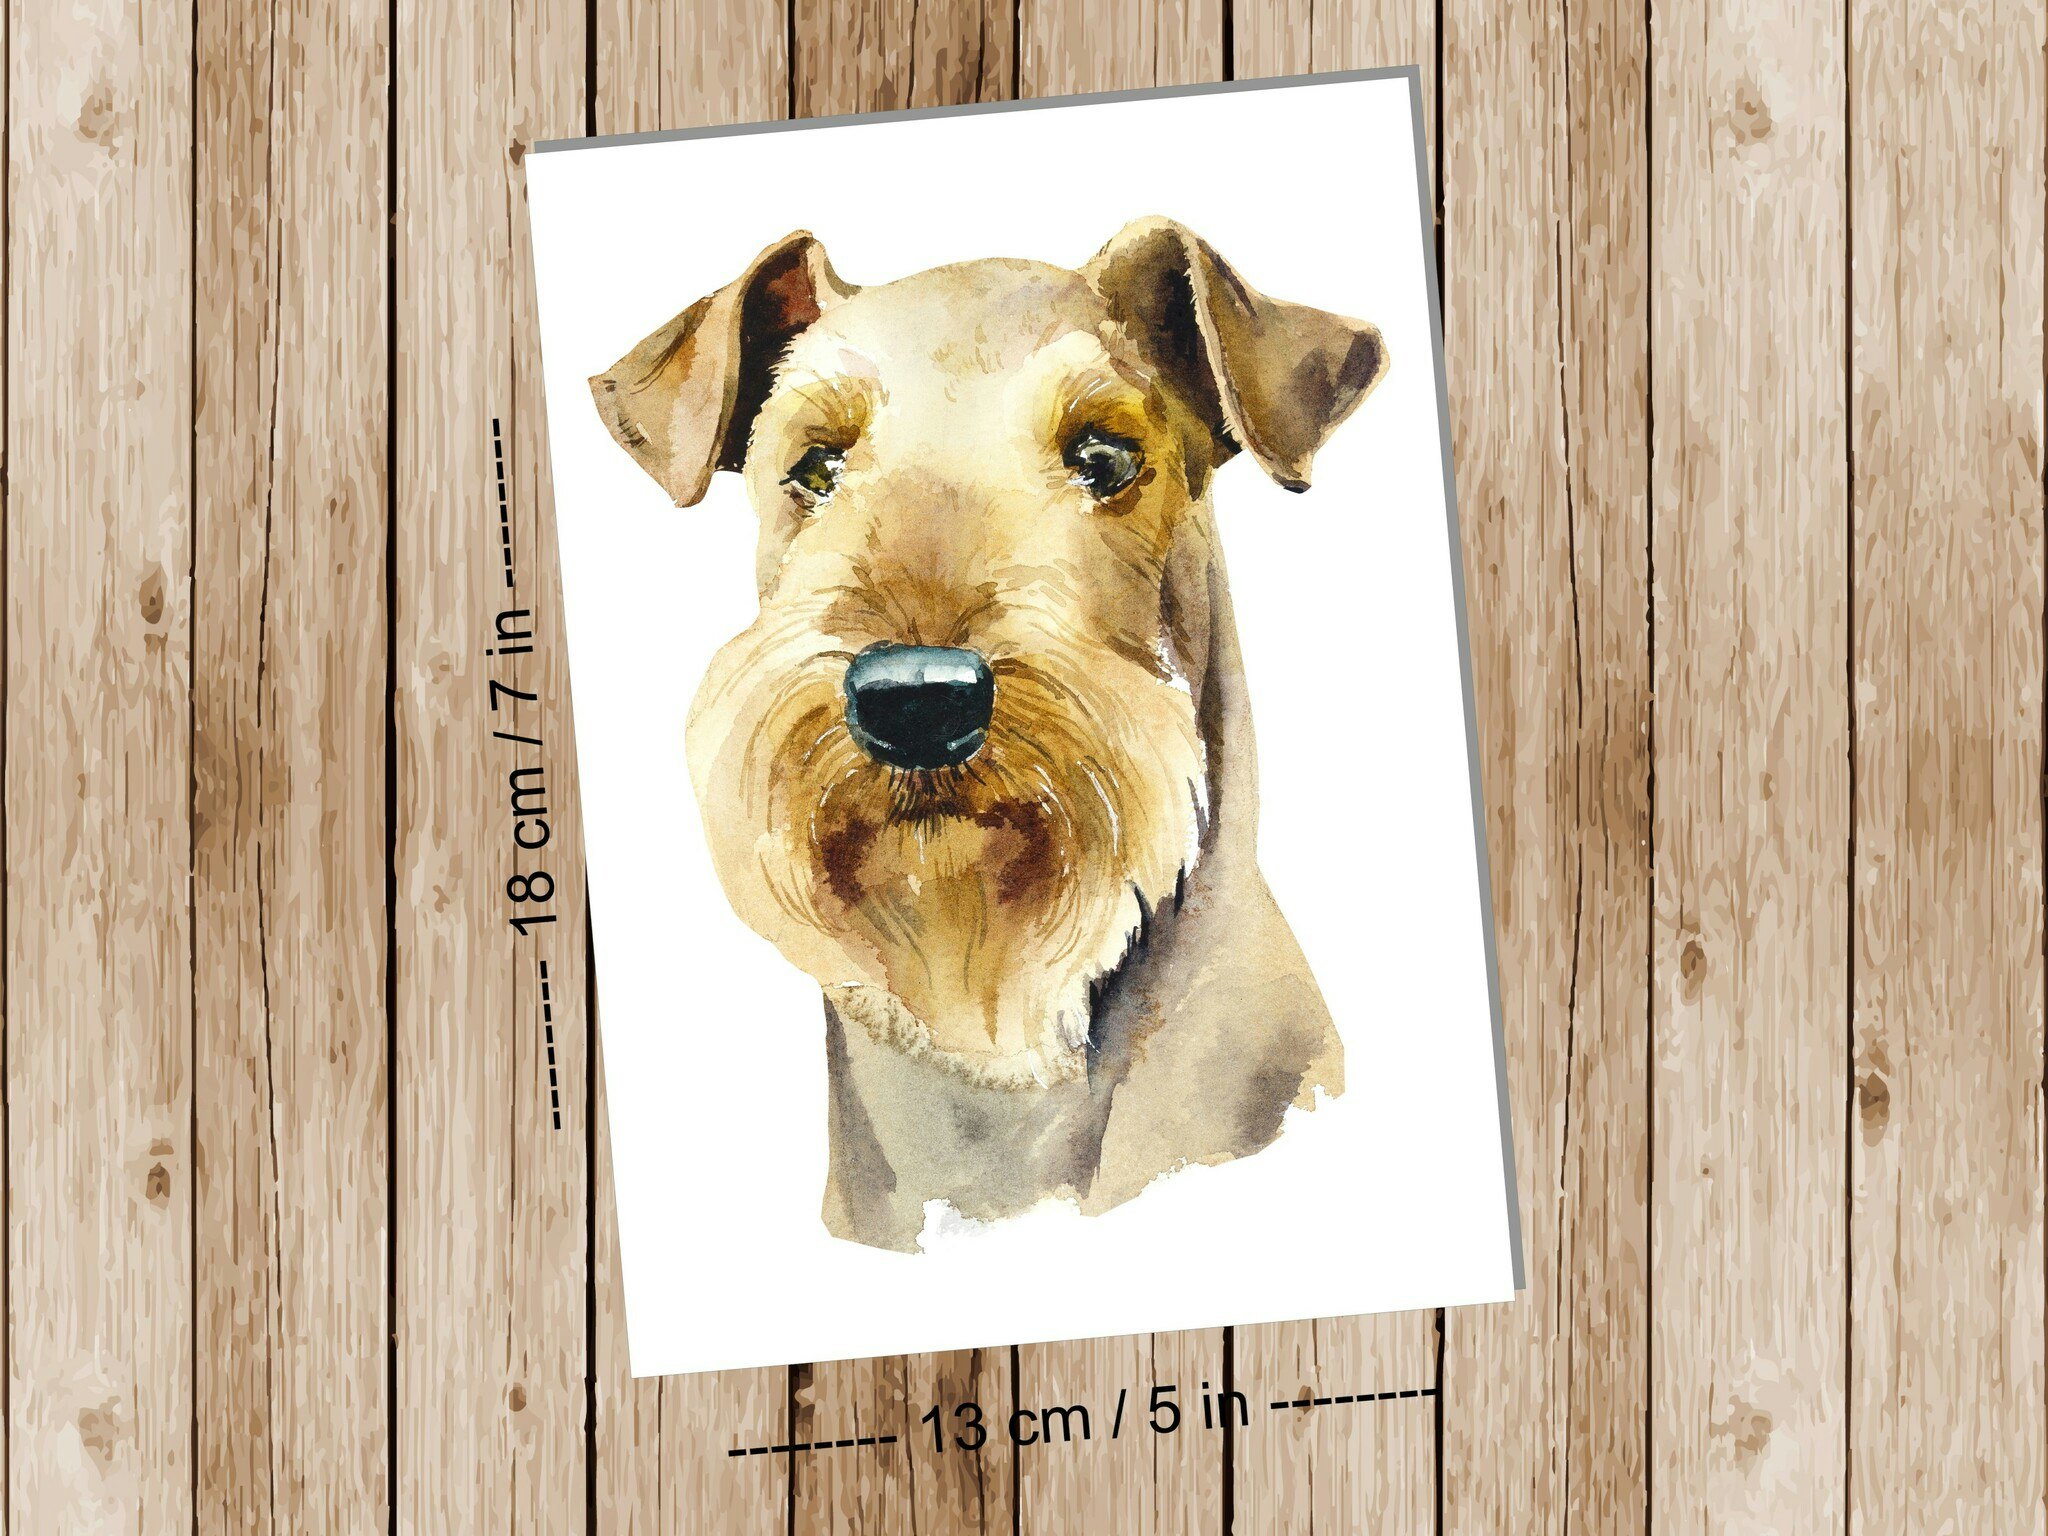 Dog Airedale Terrier - Art print